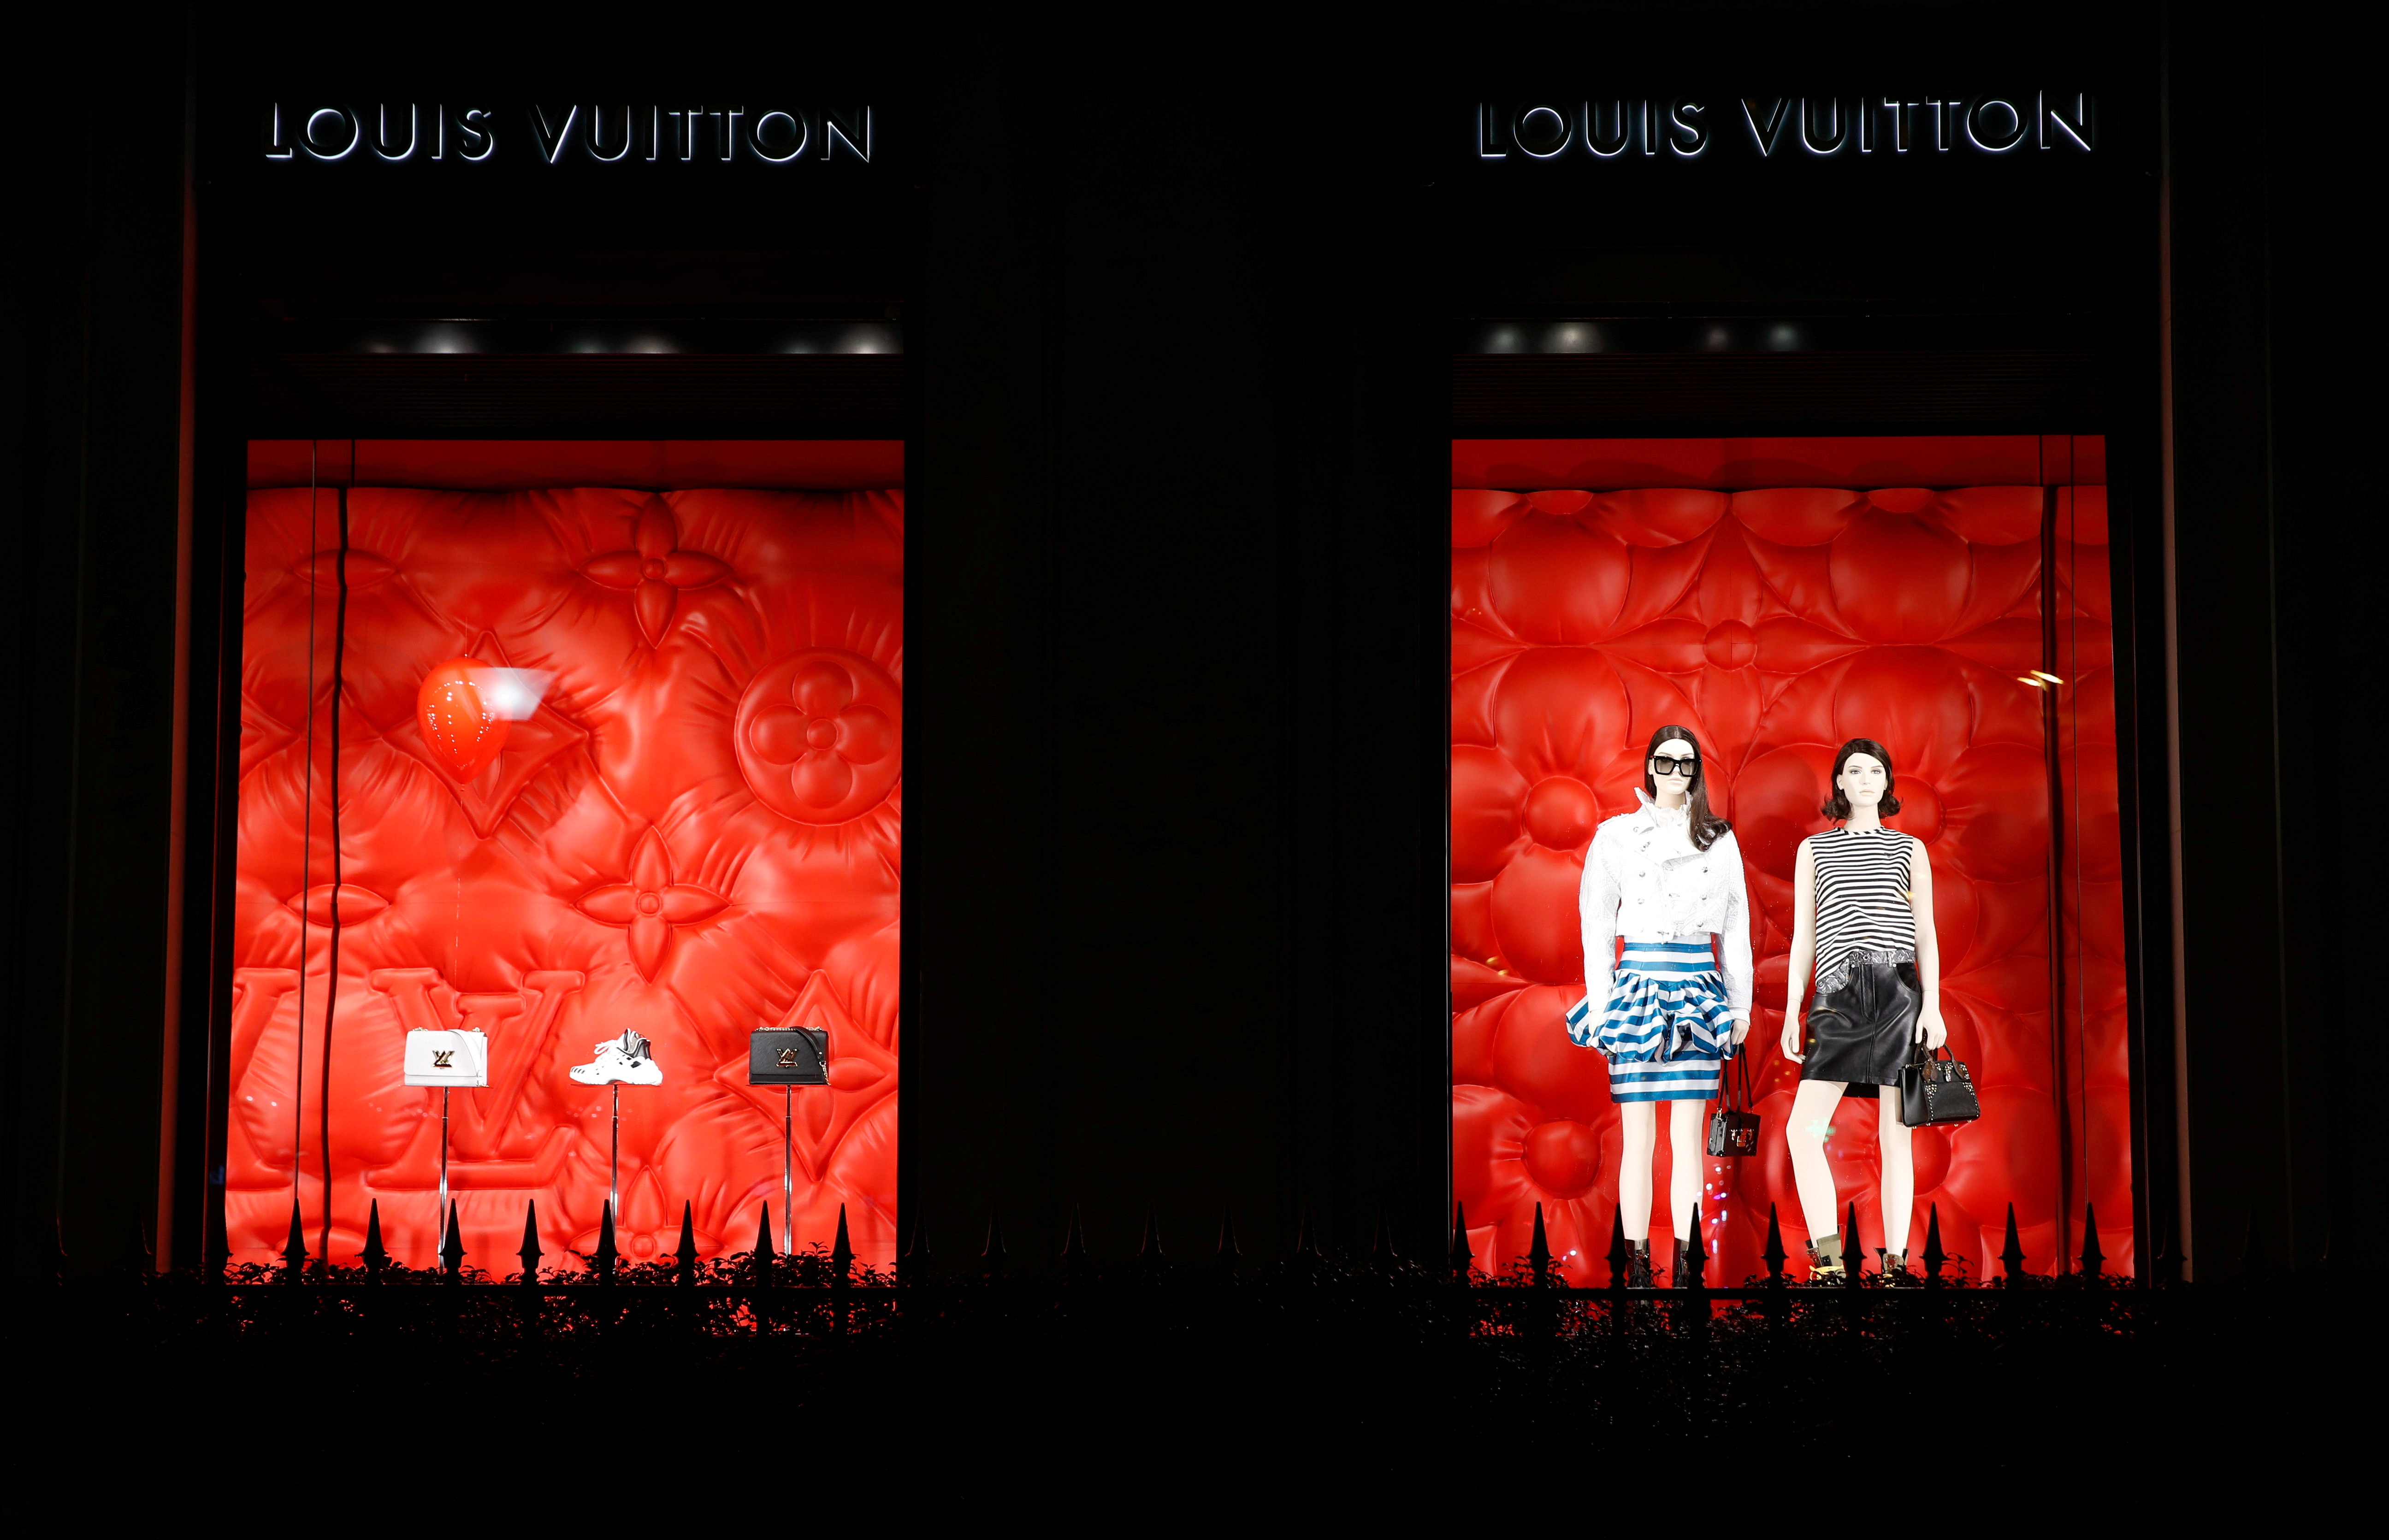 French luxury group LVMH to pay €10 million to settle spying claims